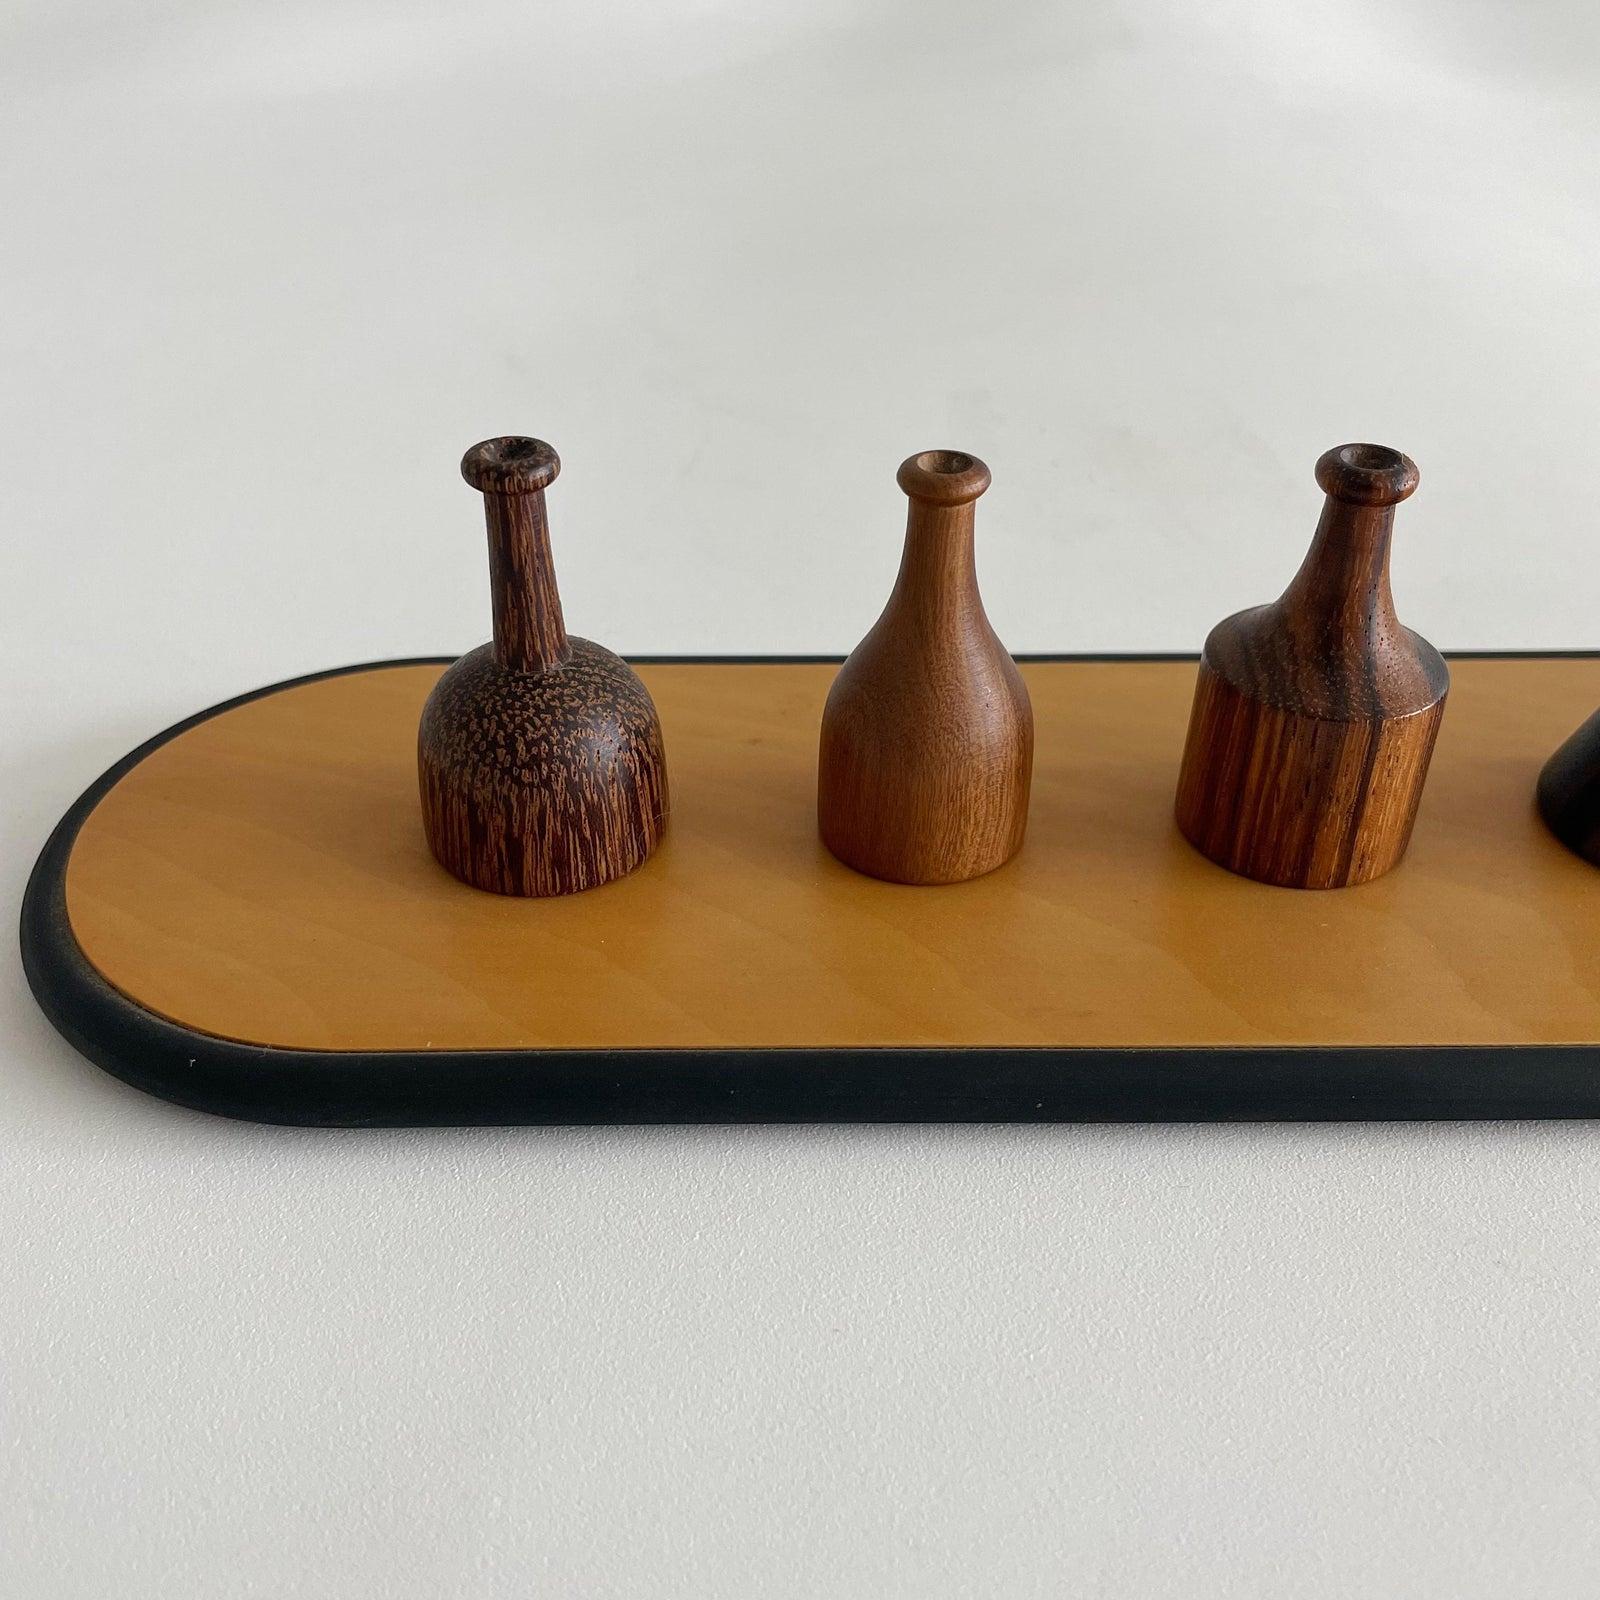 Hand-Carved Giorgio Pizzitutti Exotic Wood Miniature Vases Sculpture Italy 1980's For Sale